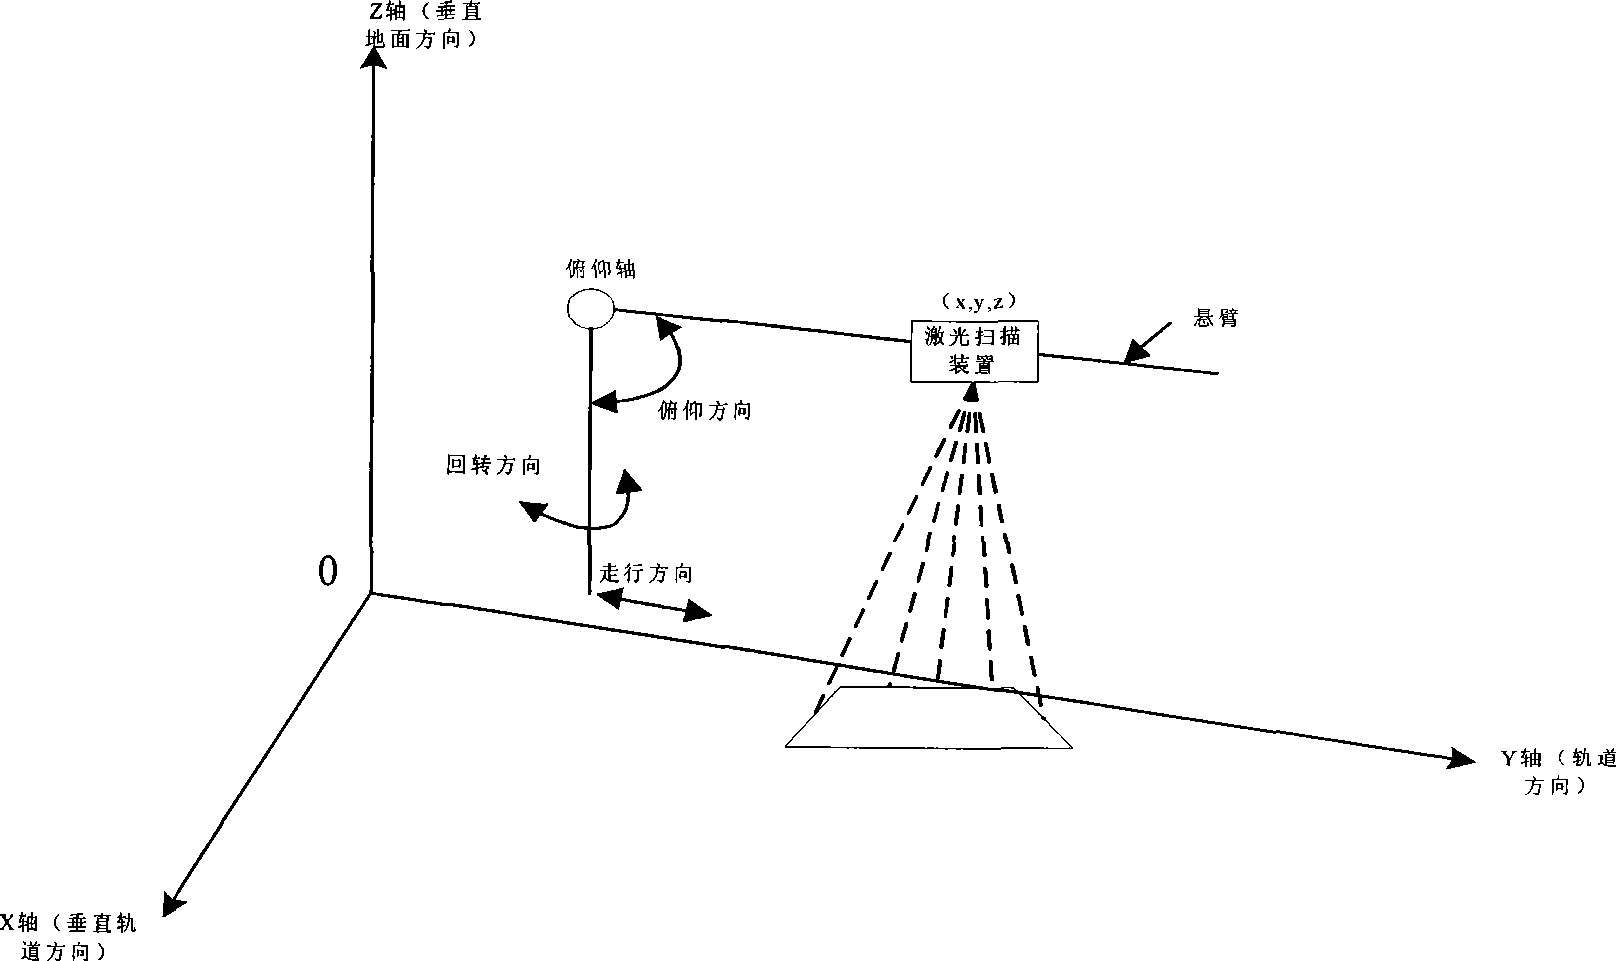 Three-dimensional imaging method for implementing material pile real time dynamic tracking